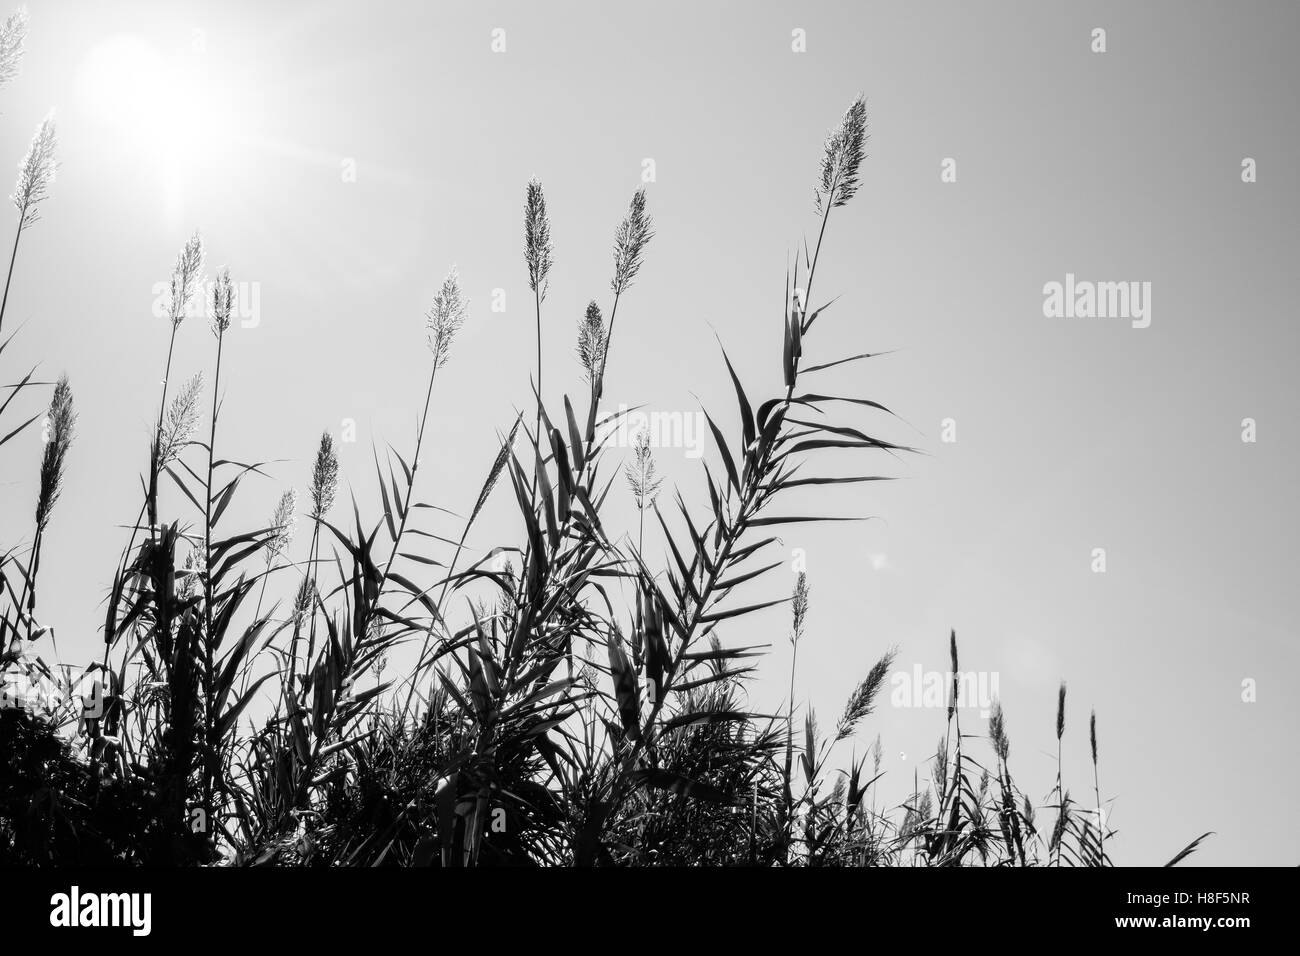 Black and white reed against a sky with a shining sun. Stock Photo